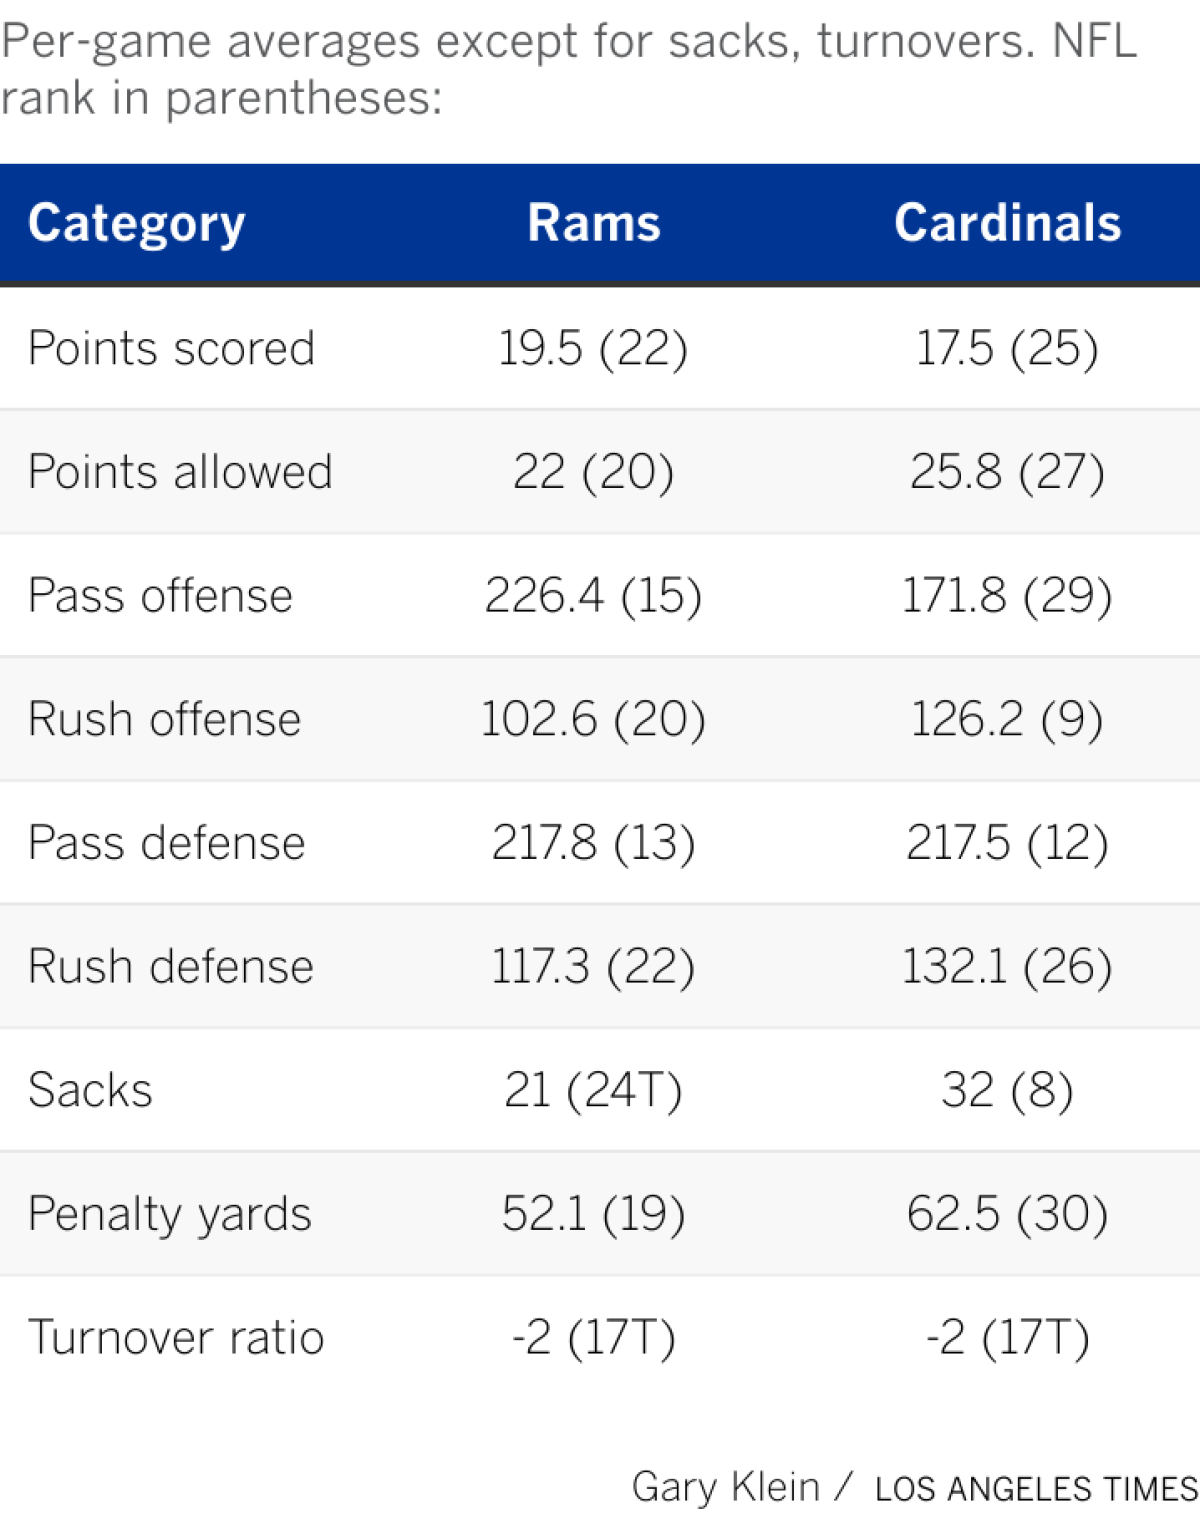 Breaking down the top team statistics for both the Rams and the Cardinals.